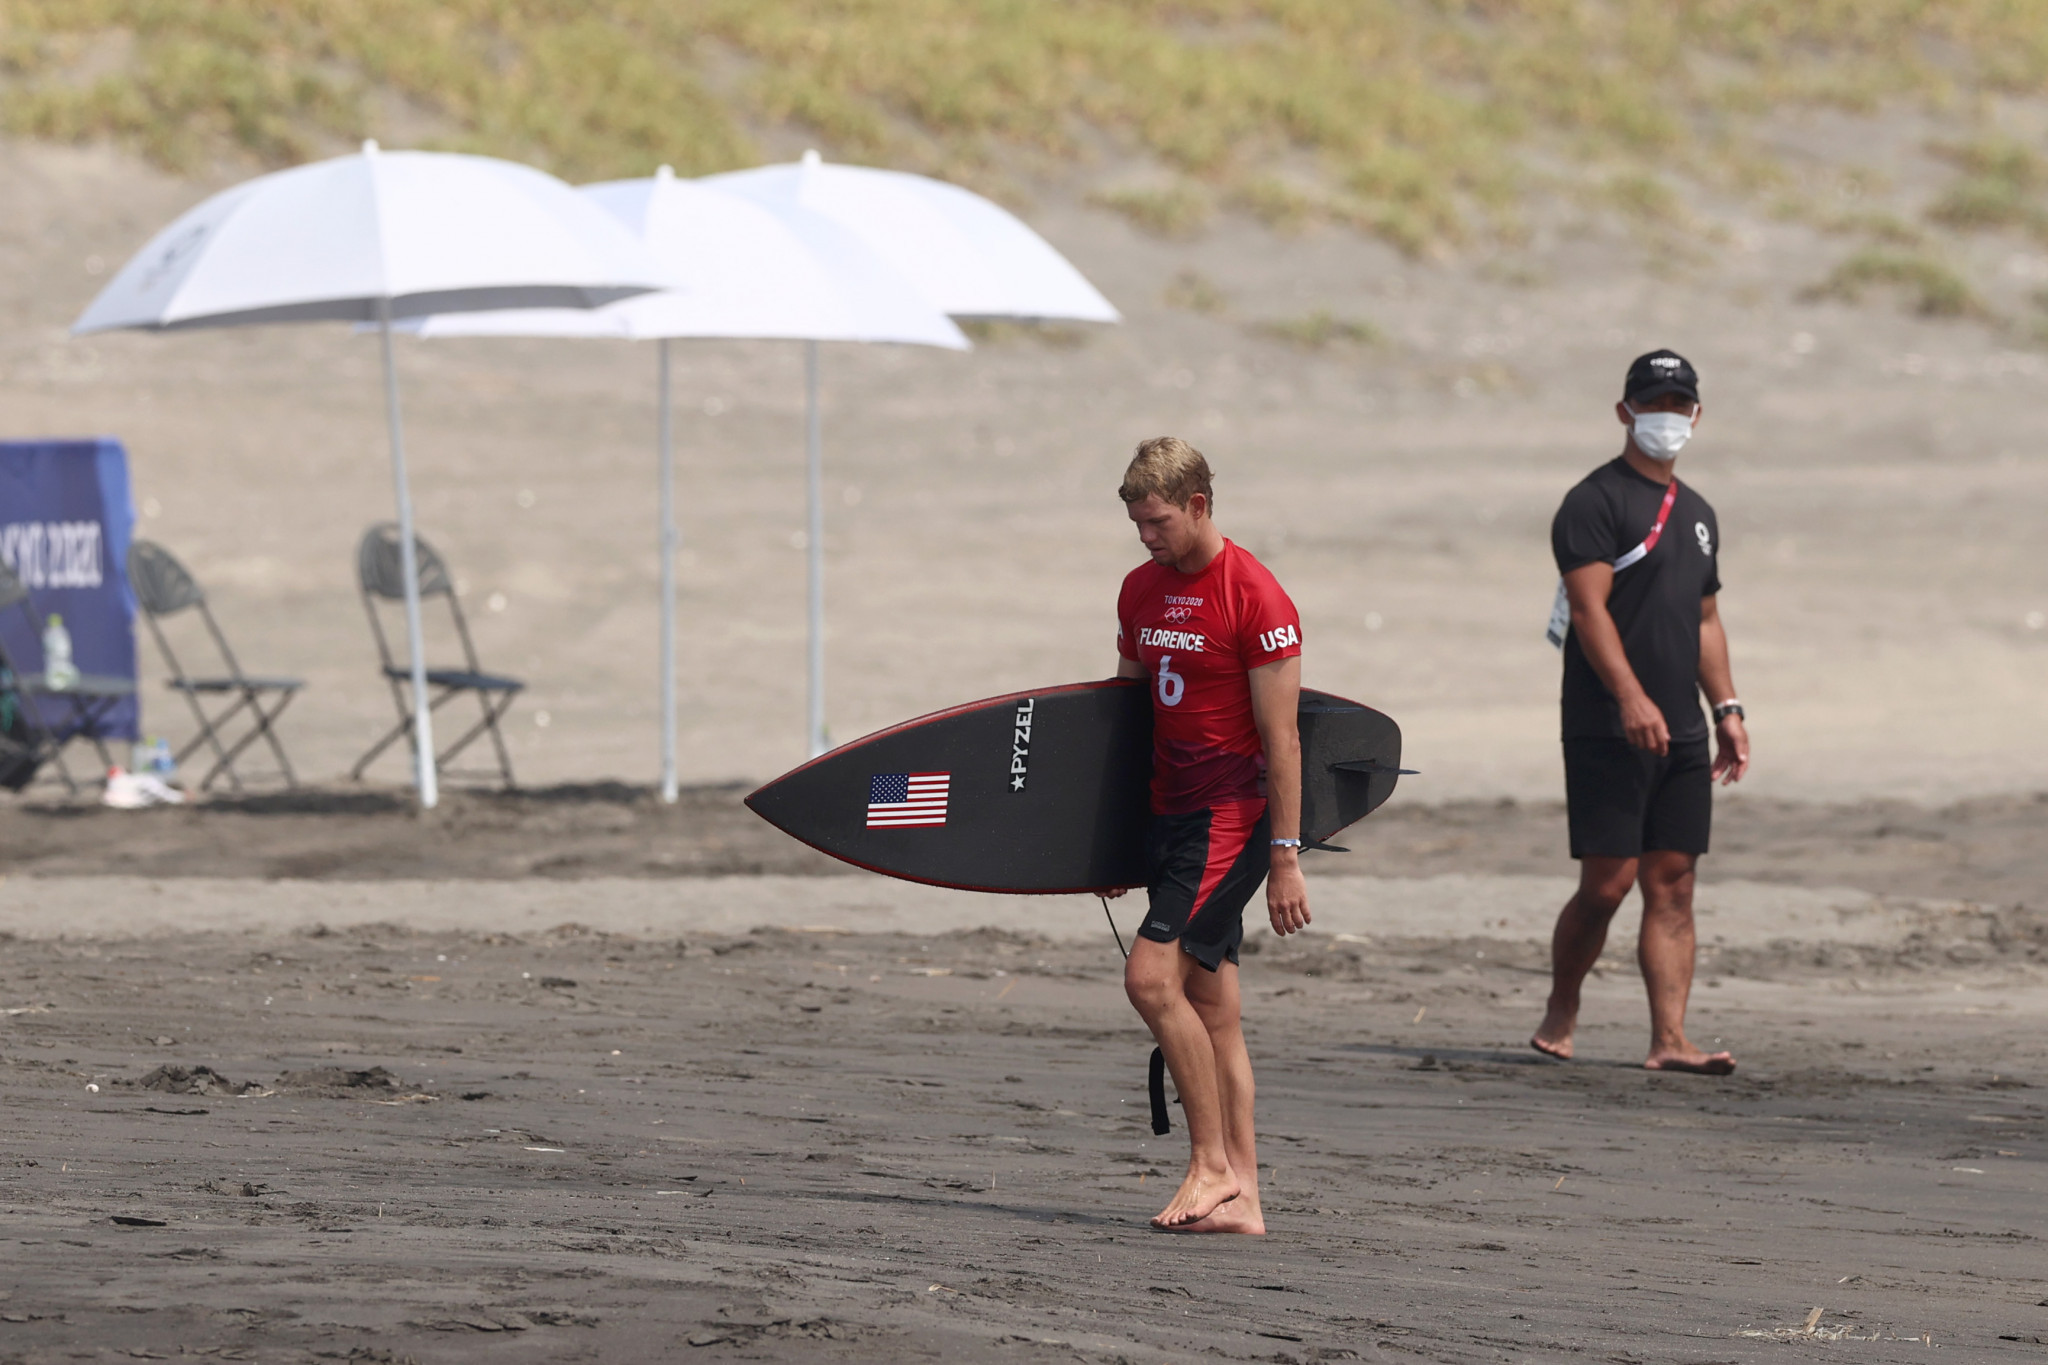 Florence and Ferreira biggest round of 16 casualties at G-Land World Surf League